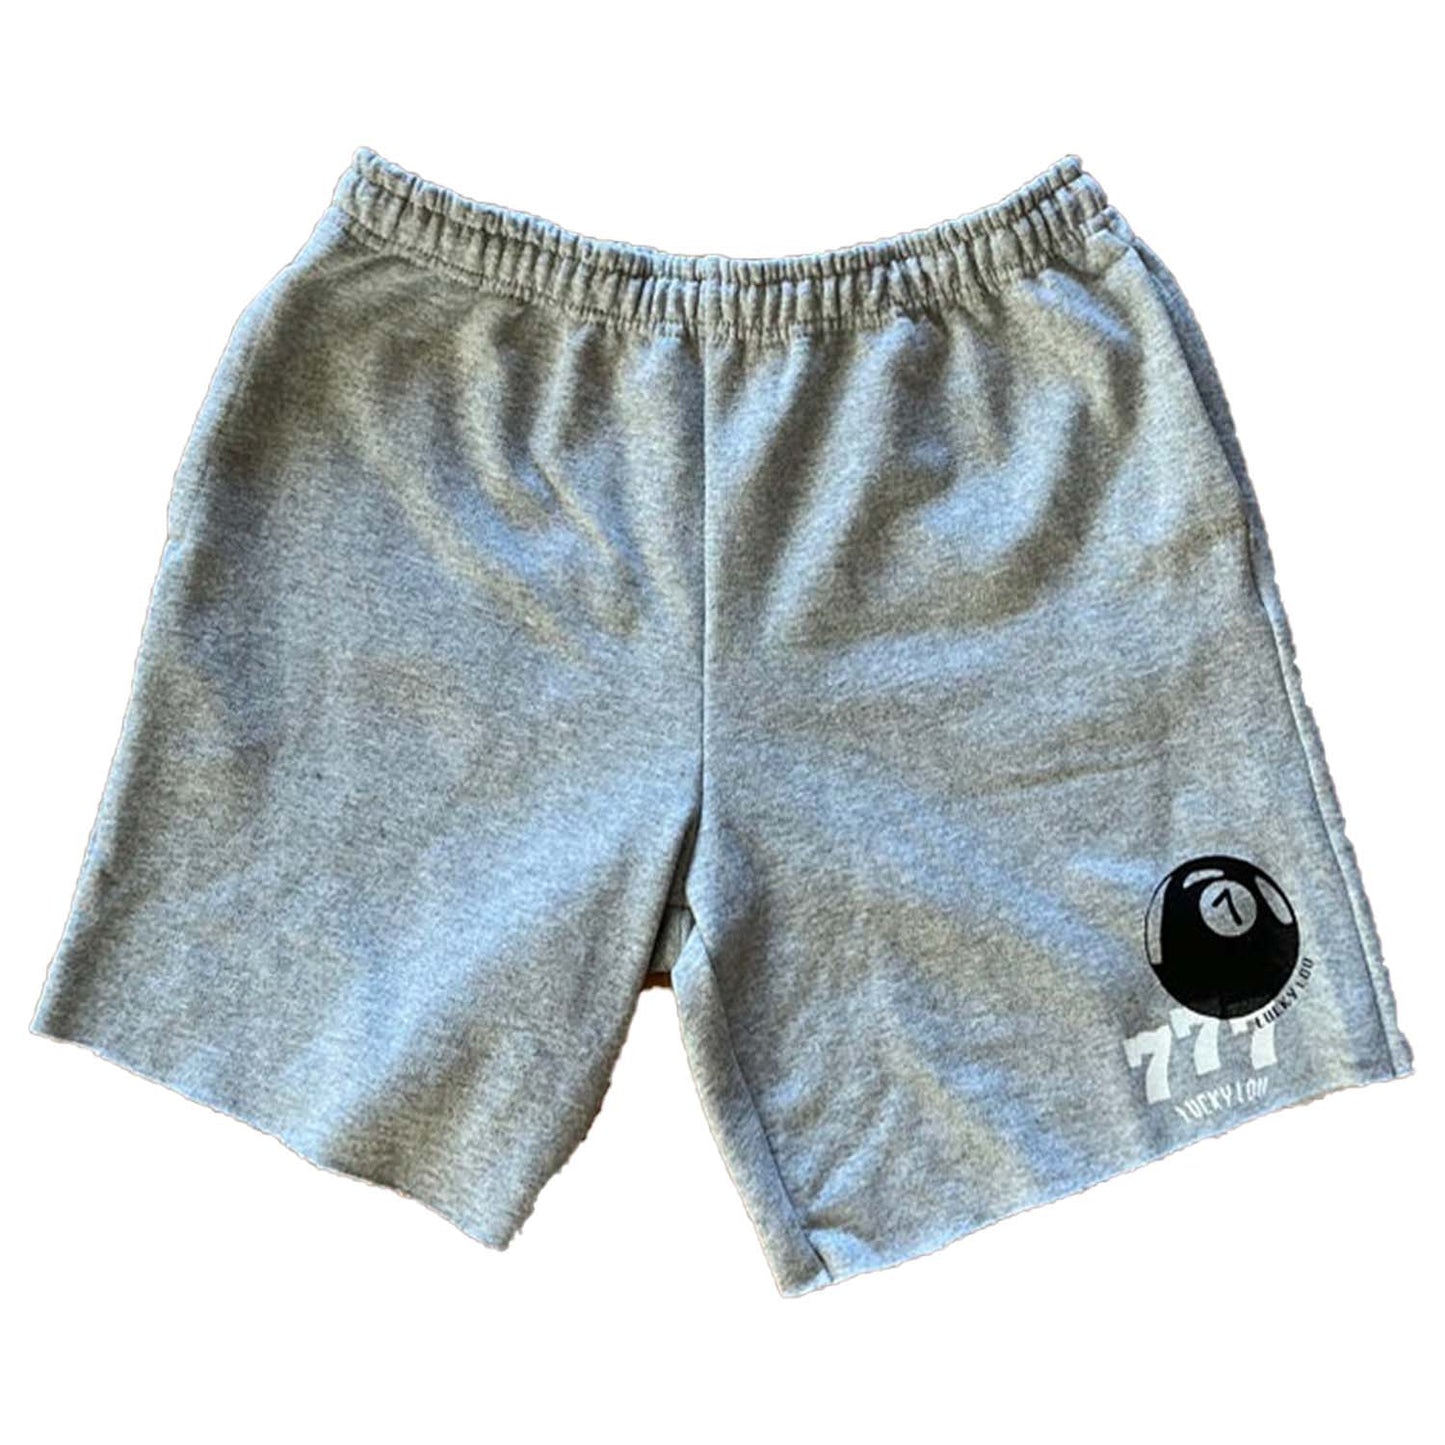 "ON A ROLL" SWEAT SHORTS IN GRAY